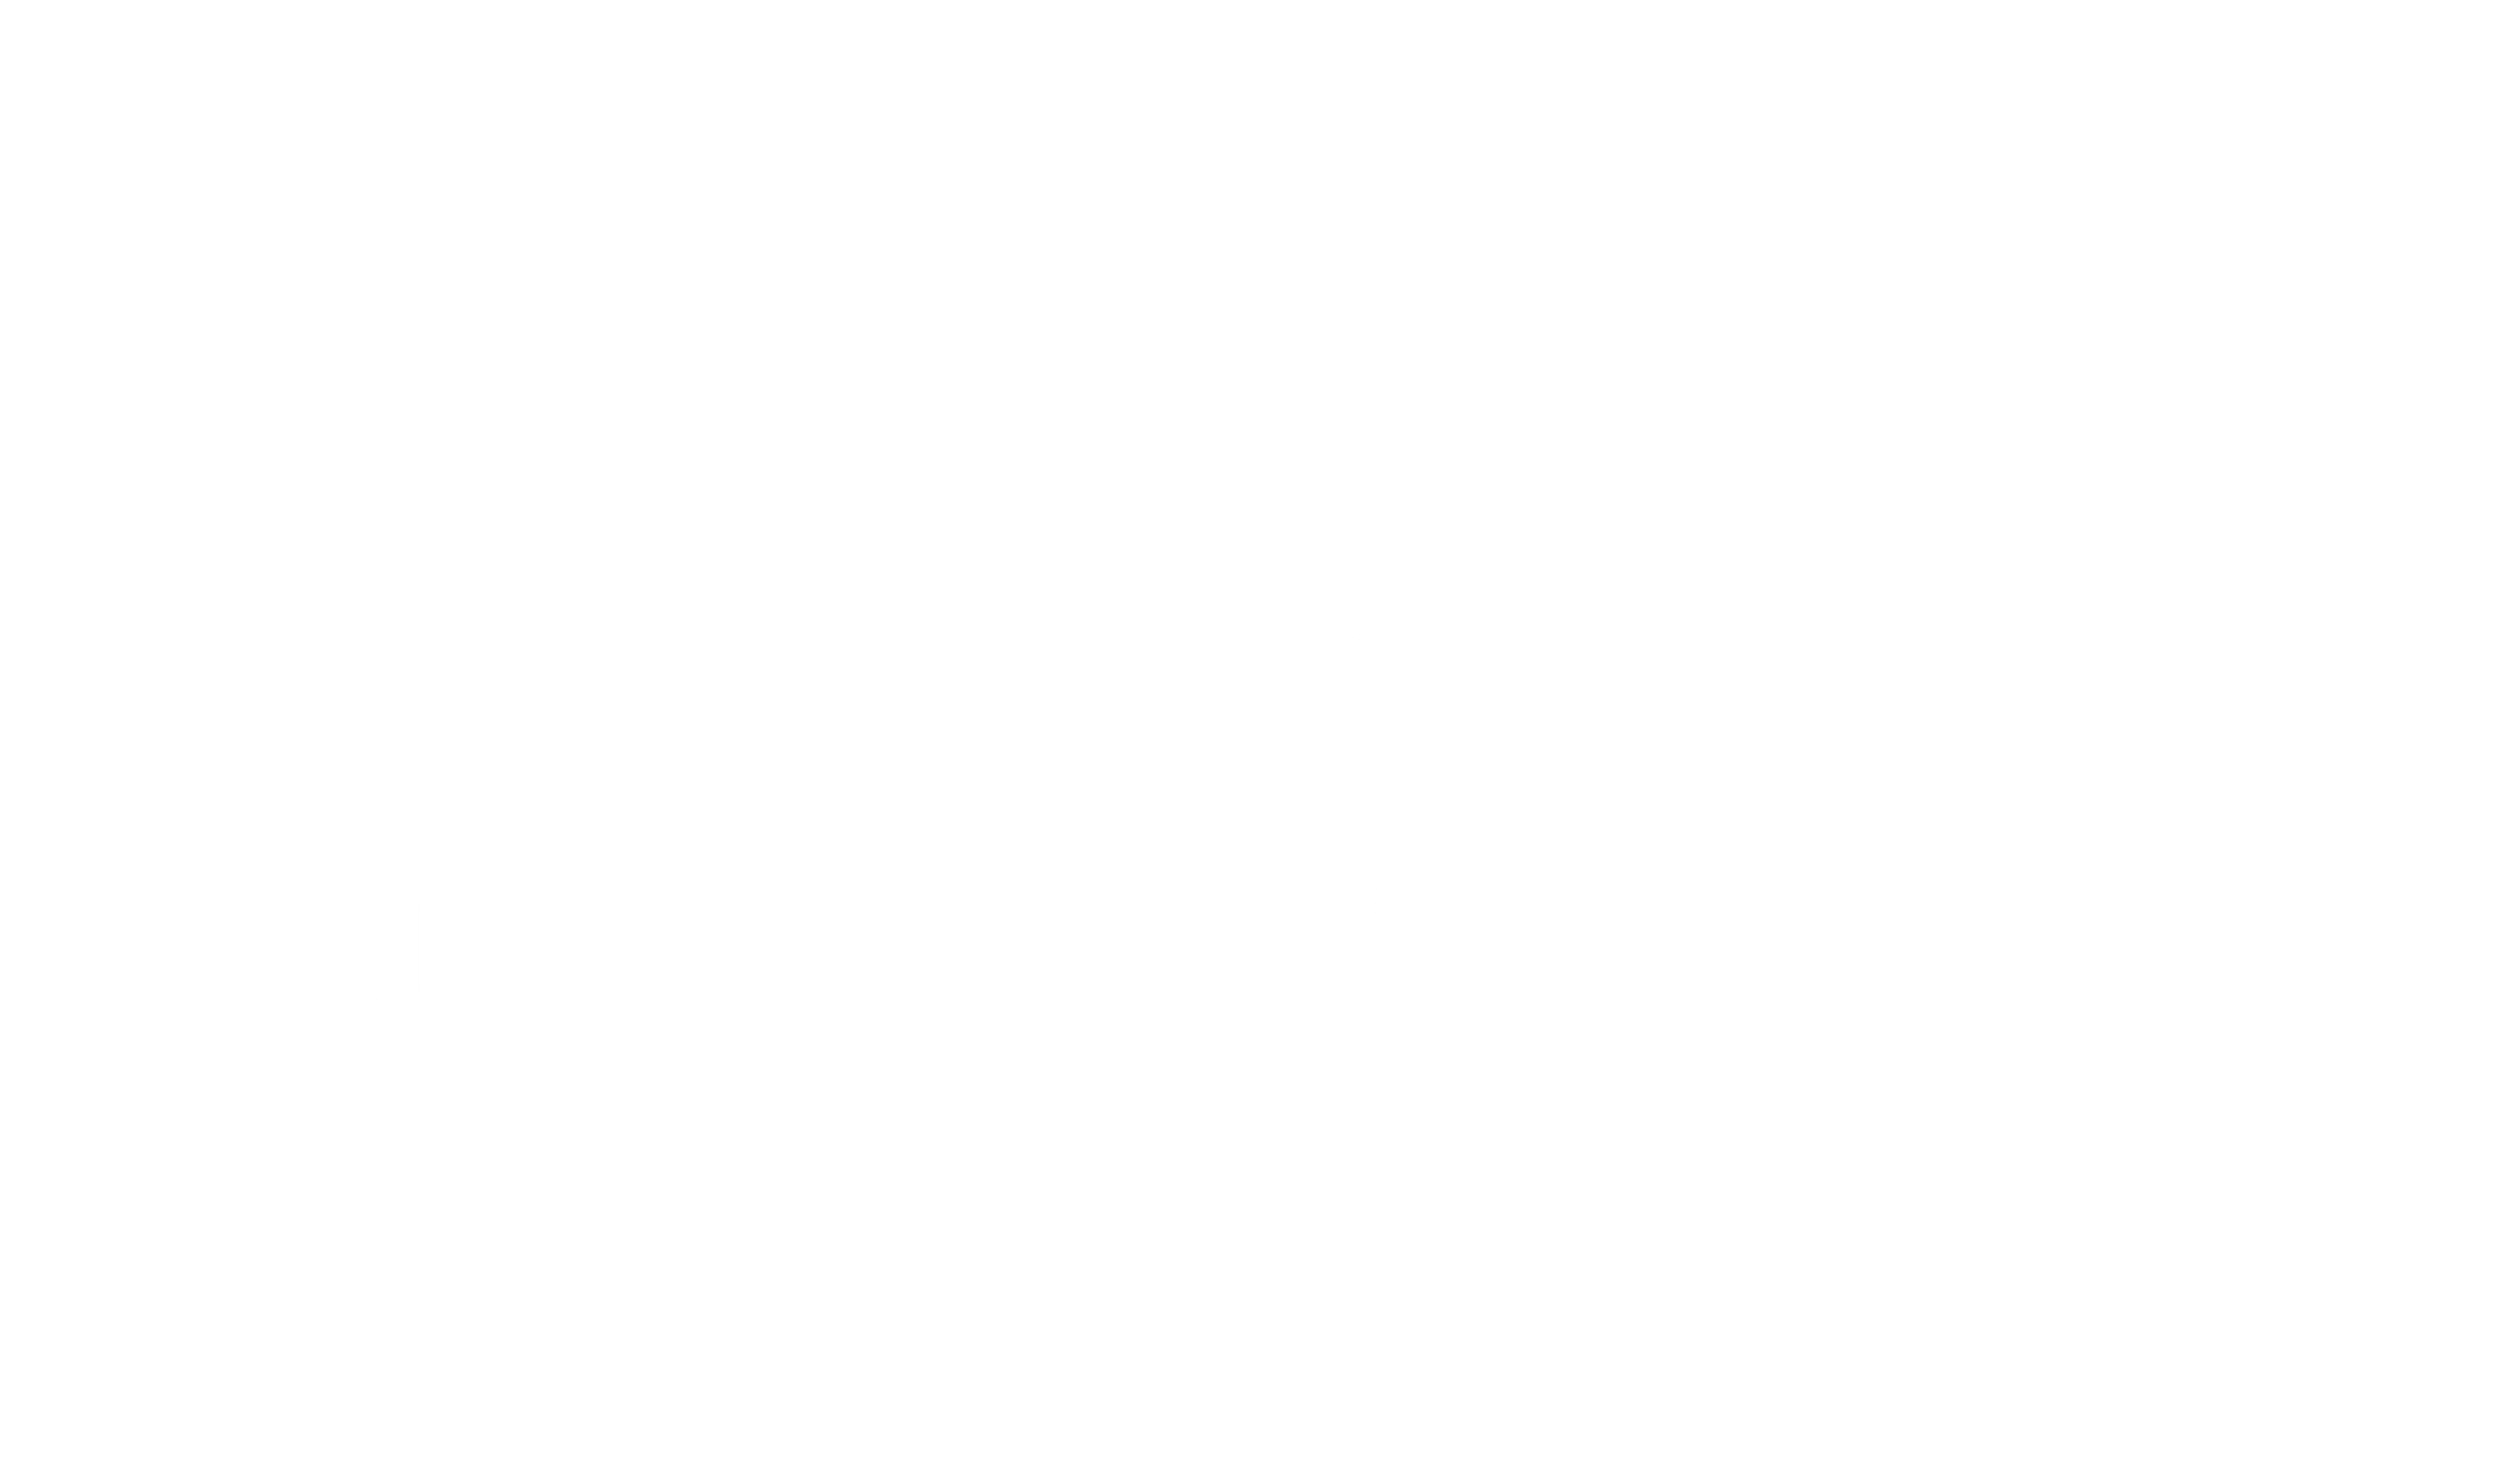 Rural Landscapes Cumbria are garden makeover specialists based in the heart of the Eden Valley and offer a vast range of quality landscape gardening services. See our reviews on Yell.com